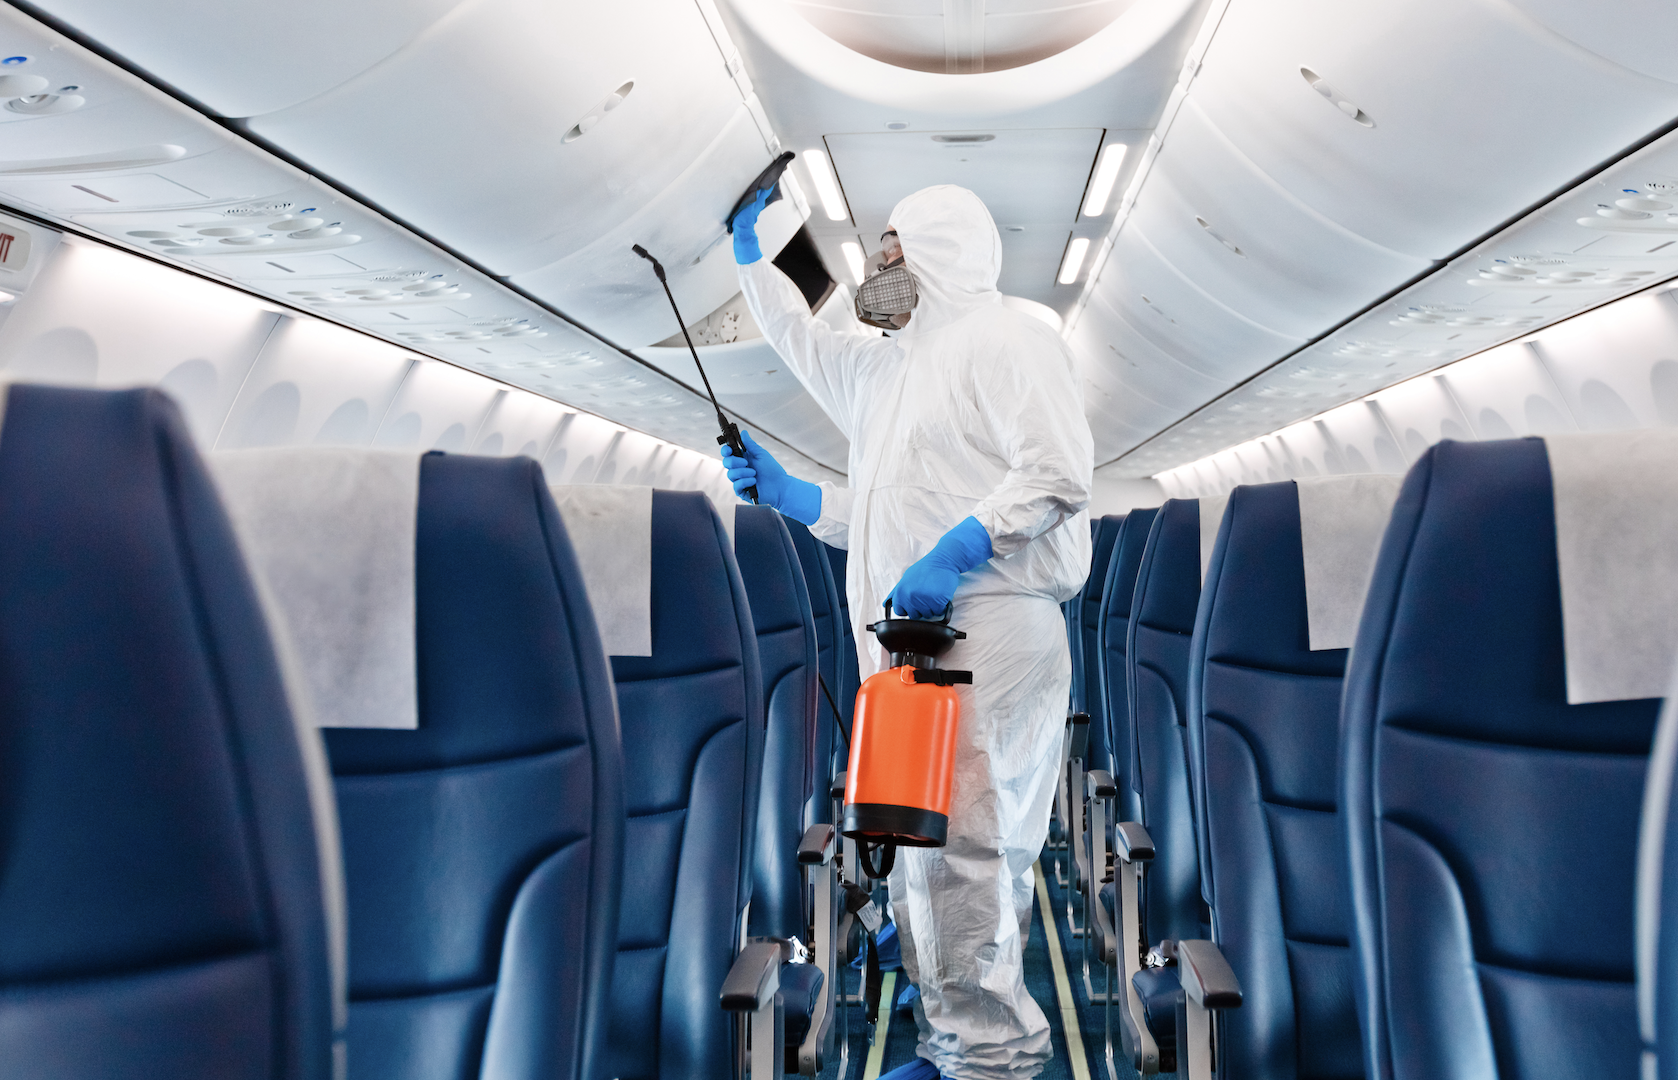 Person disinfecting an airplane in a hazmat suit